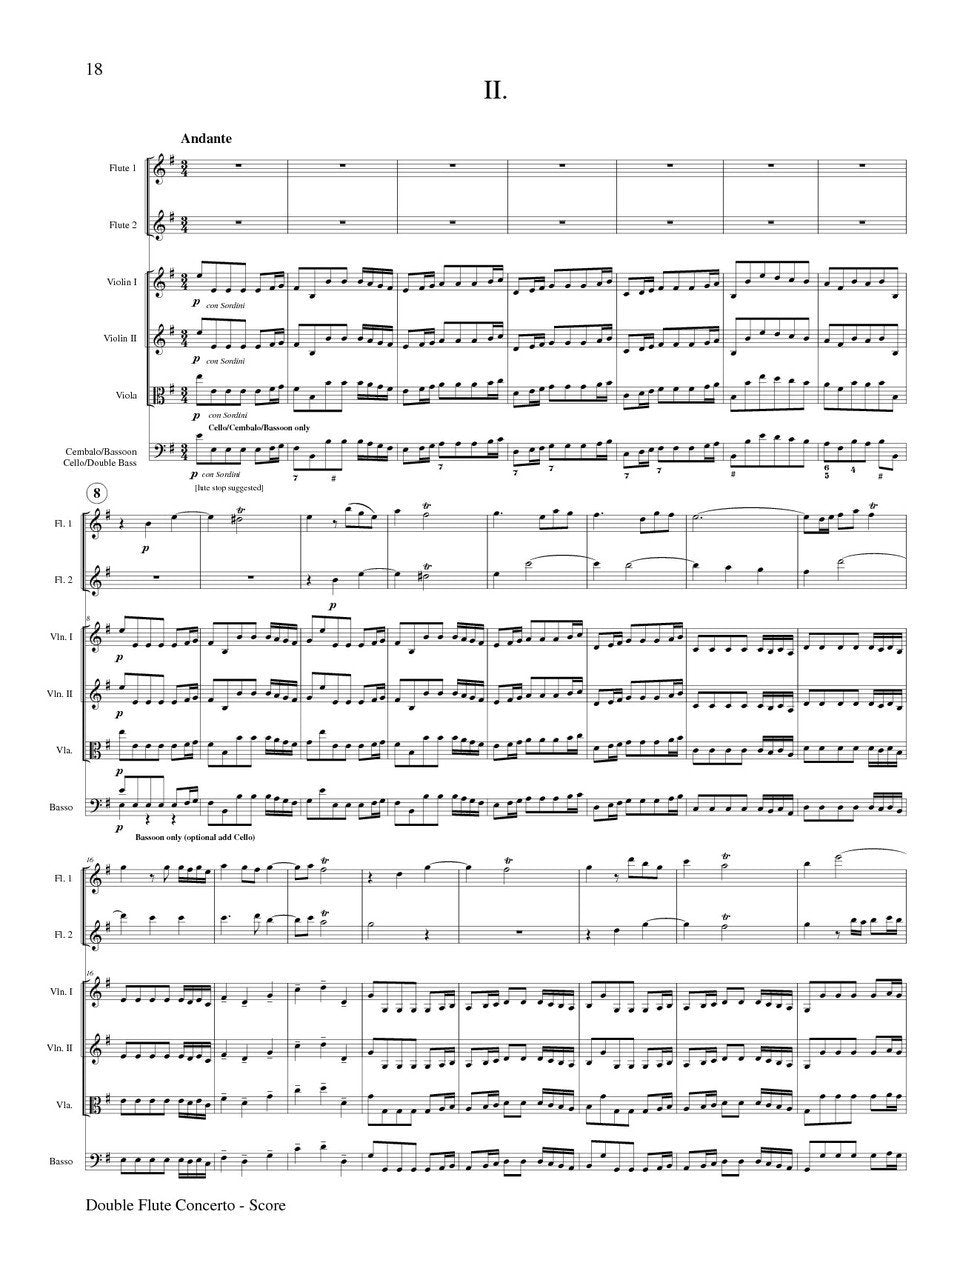 Quantz - Double Flute Concerto in G Major (Two Flutes and Orchestra)